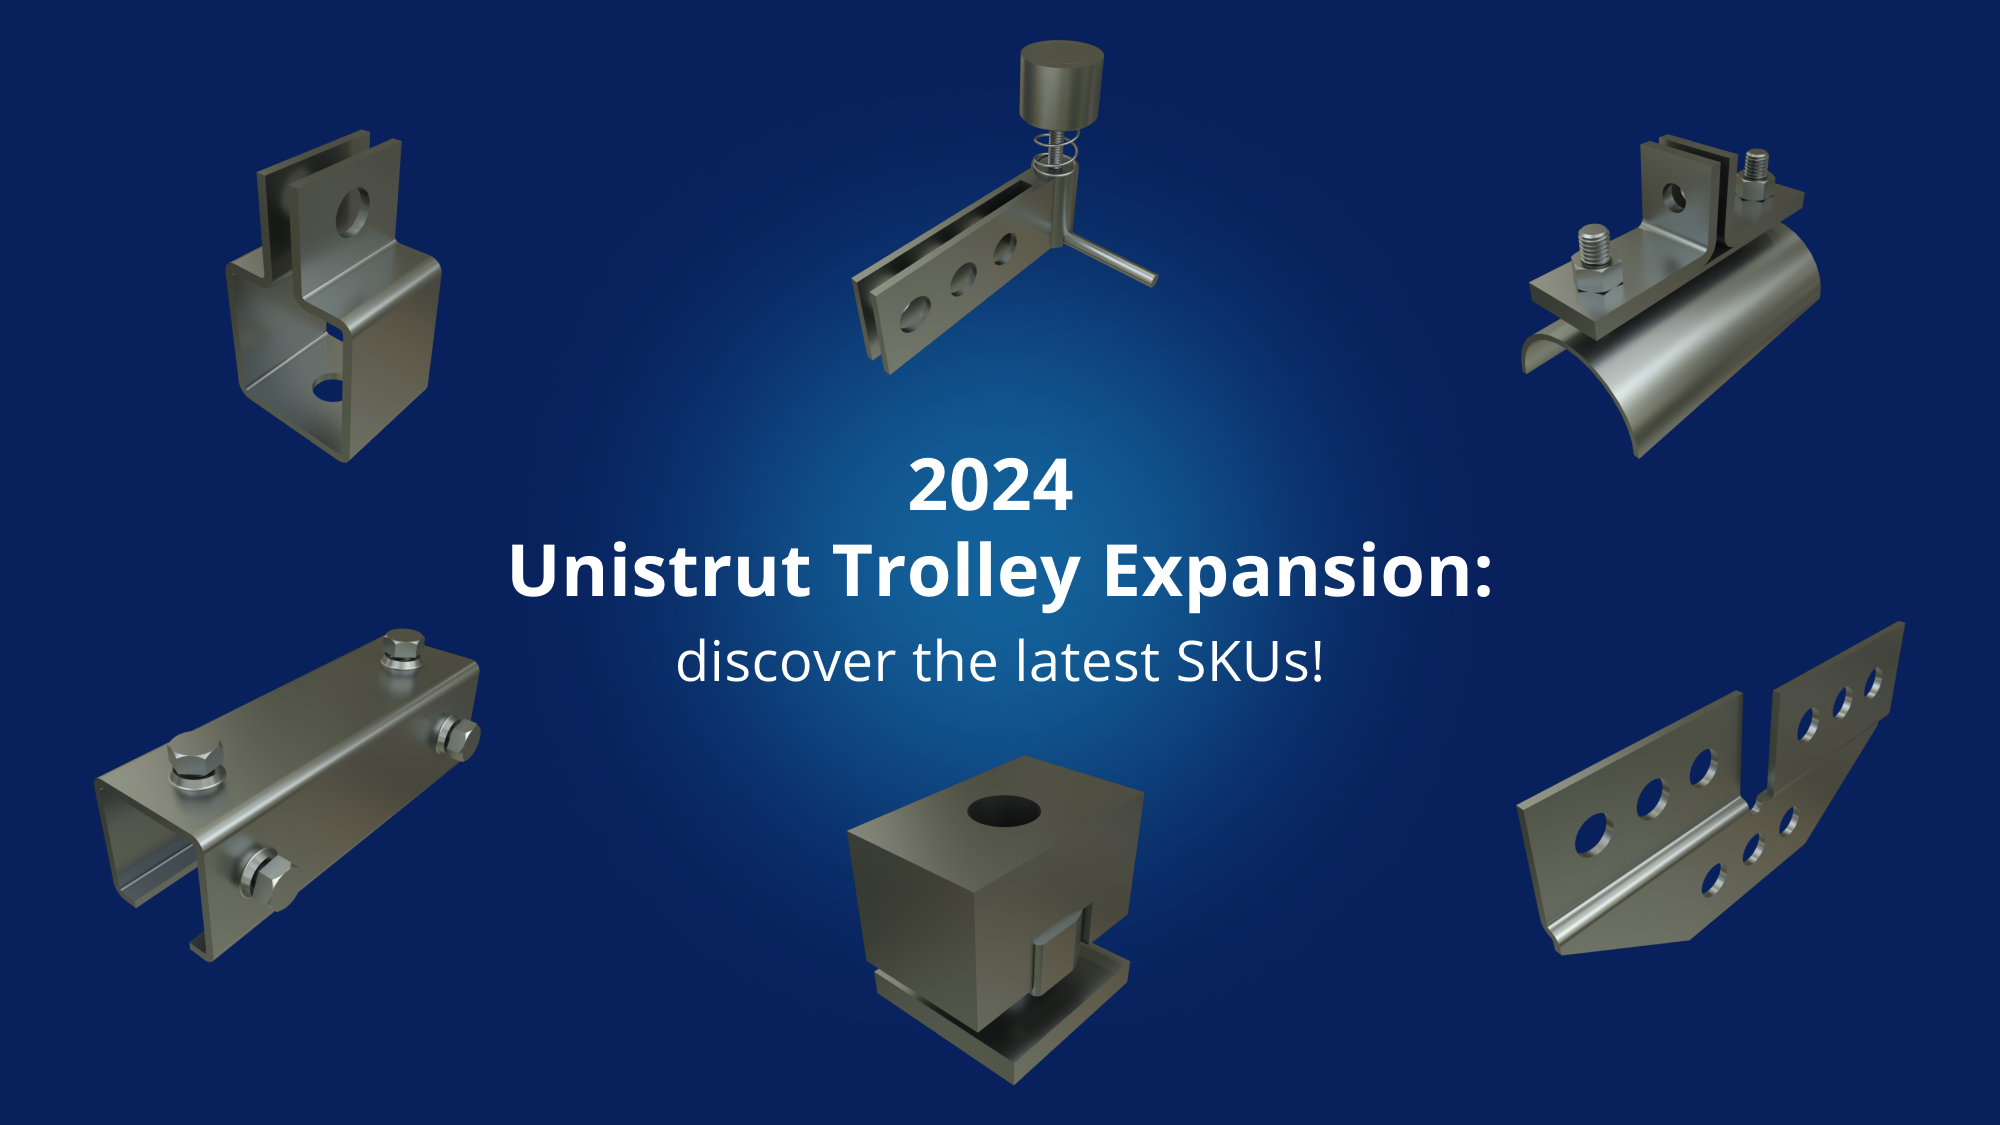 Introducing Atkore's New Unistrut Trolley Products for 2024